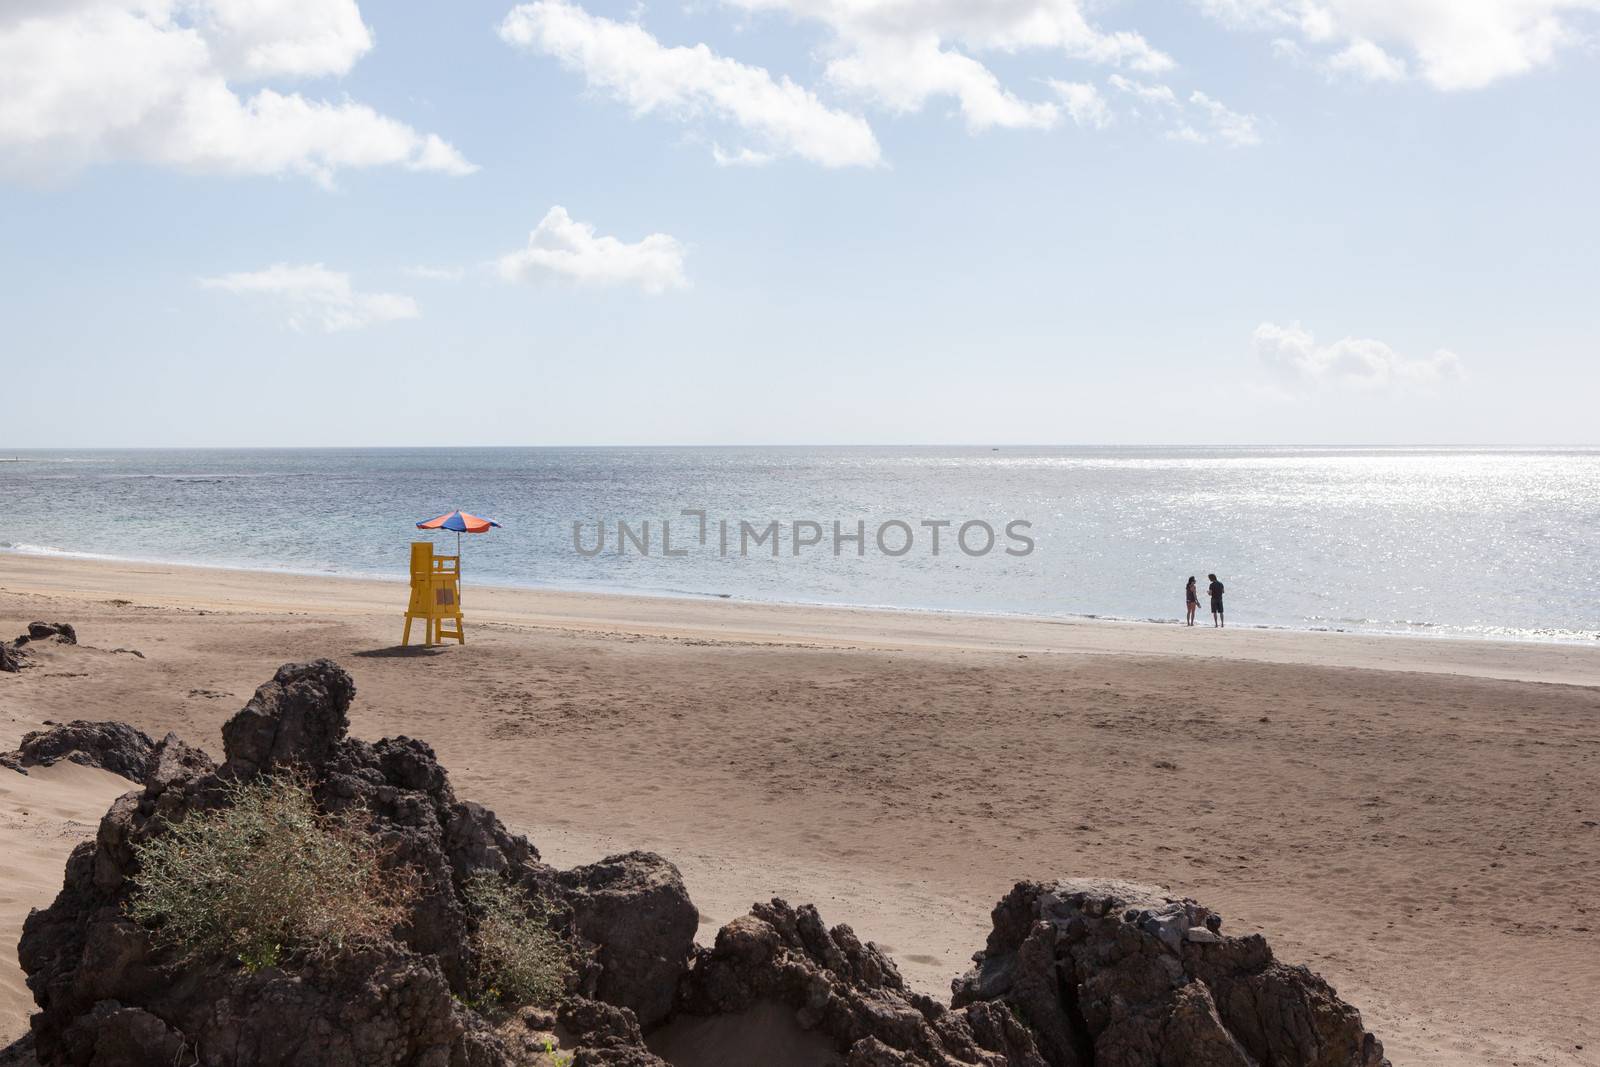 Some place in Lanzarote by SveinOttoJacobsen